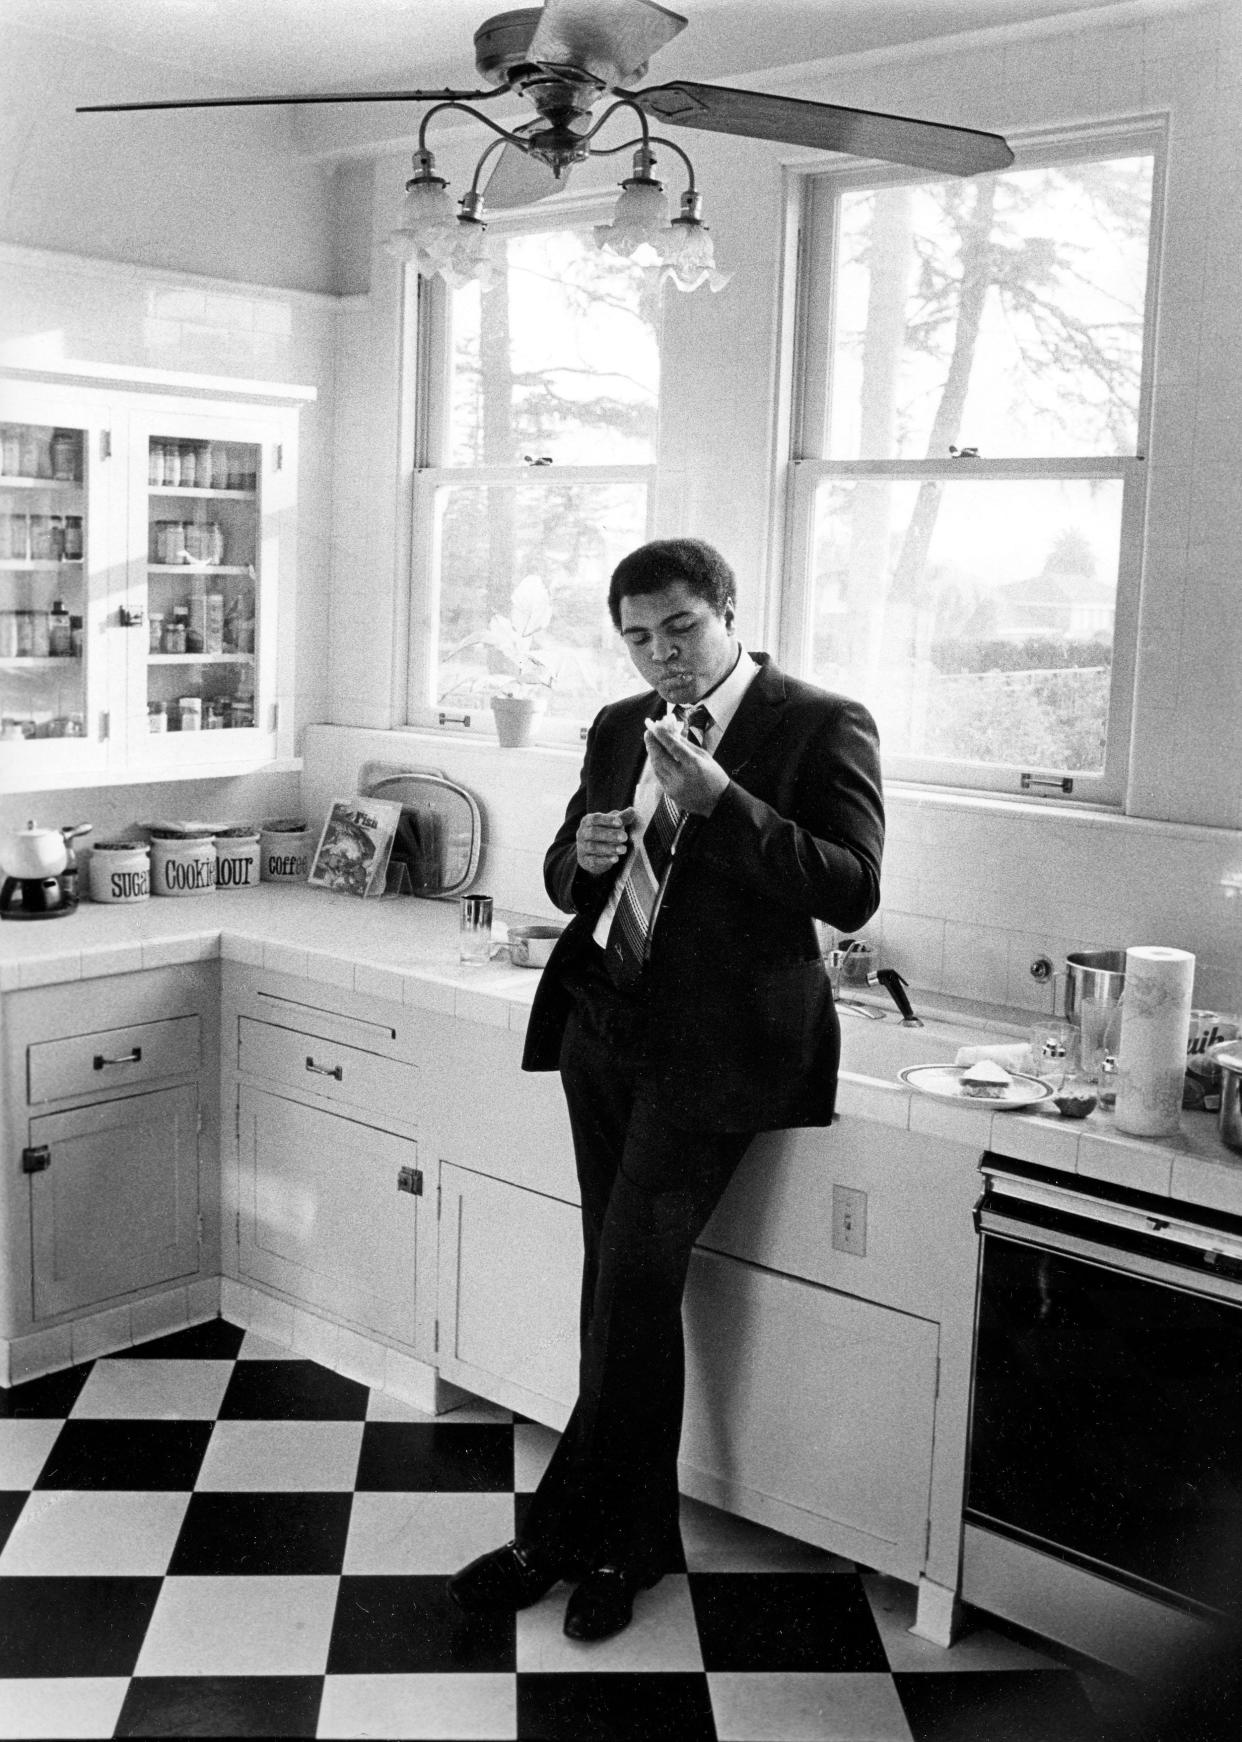 In this photo by Henderson Community College graduate and (later) Louisville Courier-Journal photojournalist Keith Williams shows former heavyweight champion Muhammad Ali eating a sandwich in the privacy of his kitchen at his home in California in 1980.